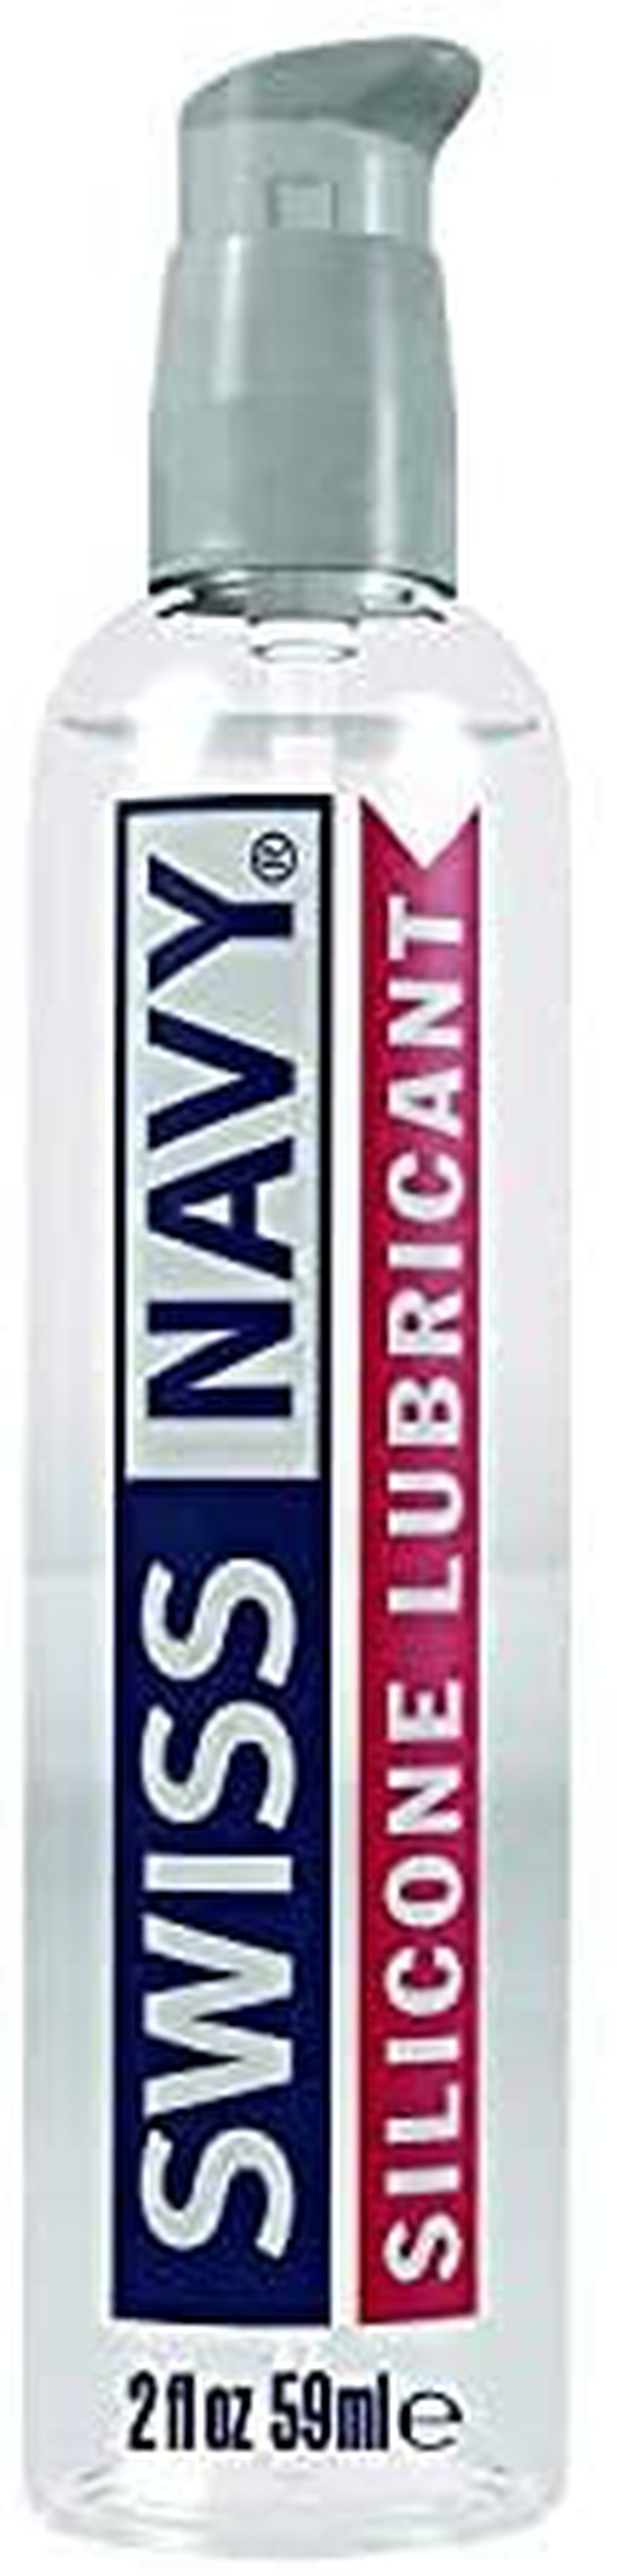 SWISS NAVY Premium Silicone Sex Lubricant Lube for Men, Women & Couples. MD Science Lab